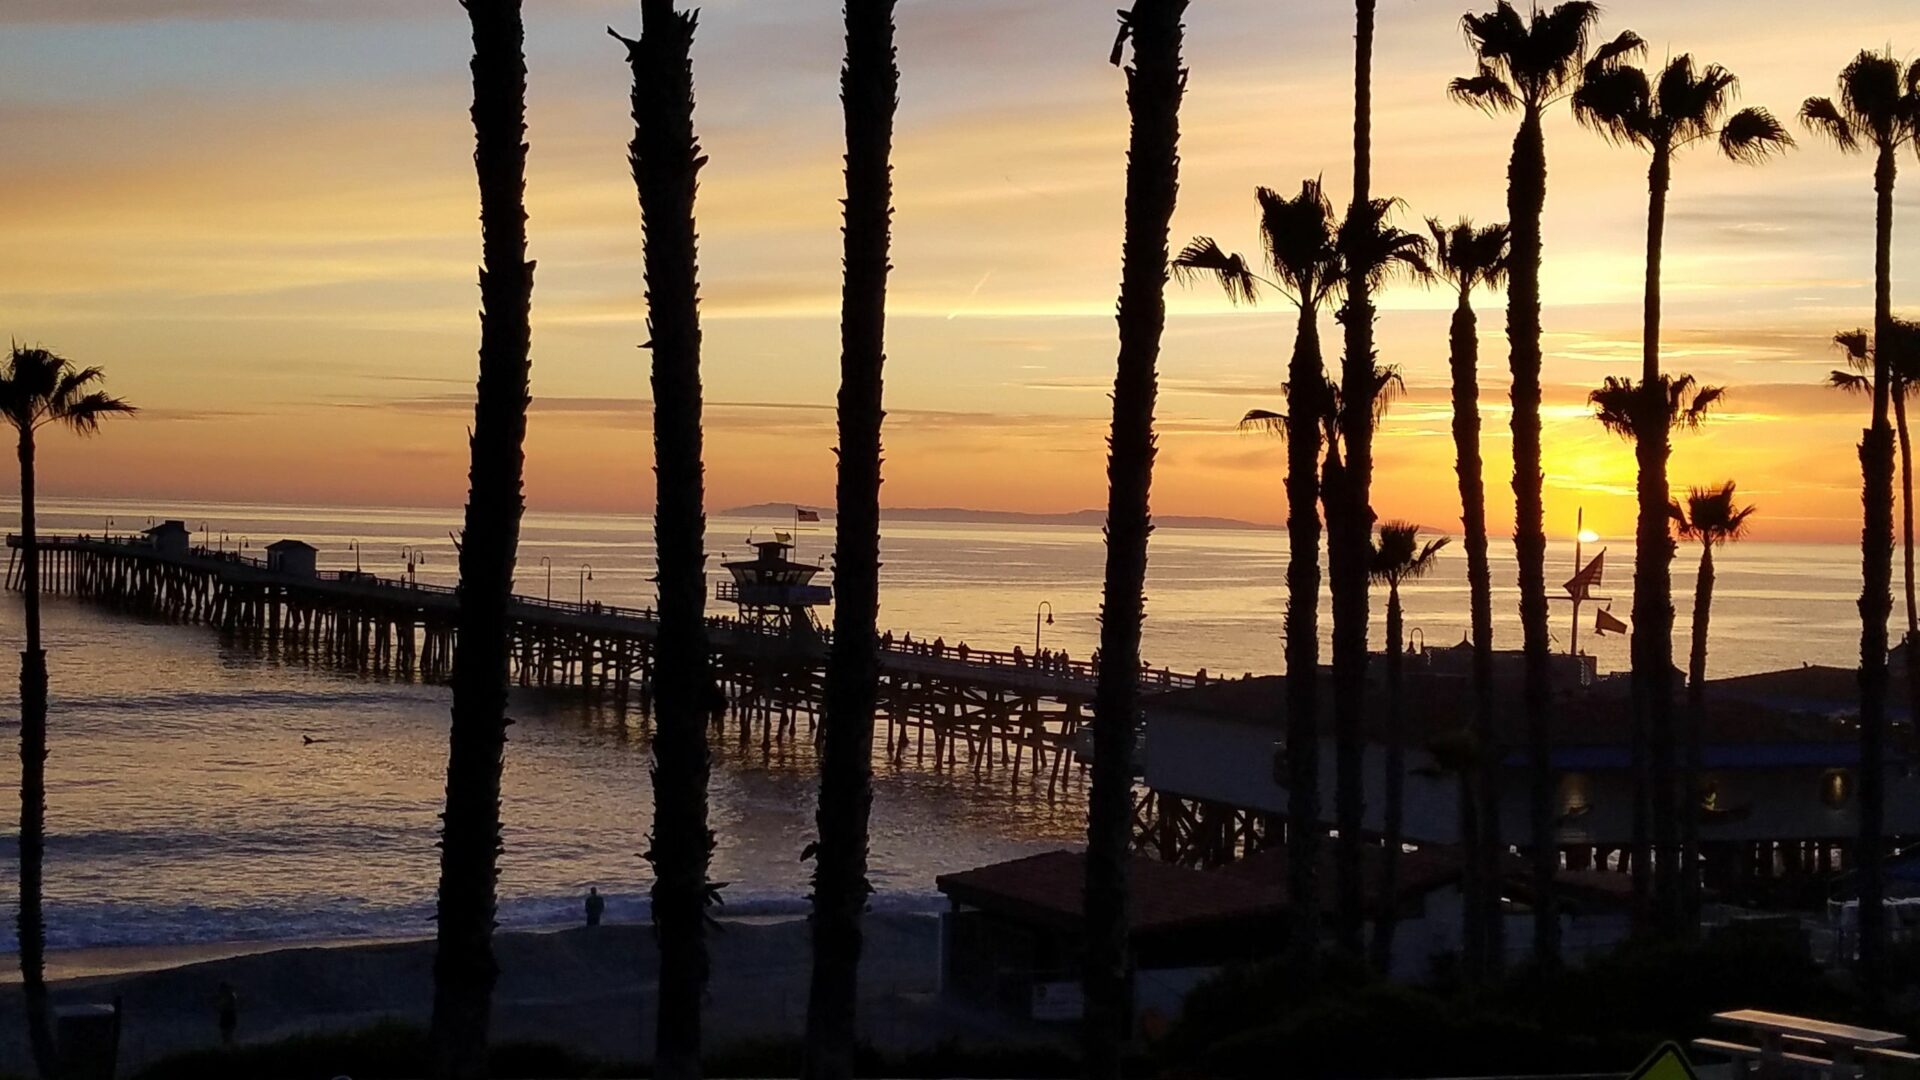 A pier with palm trees in the foreground at sunset.